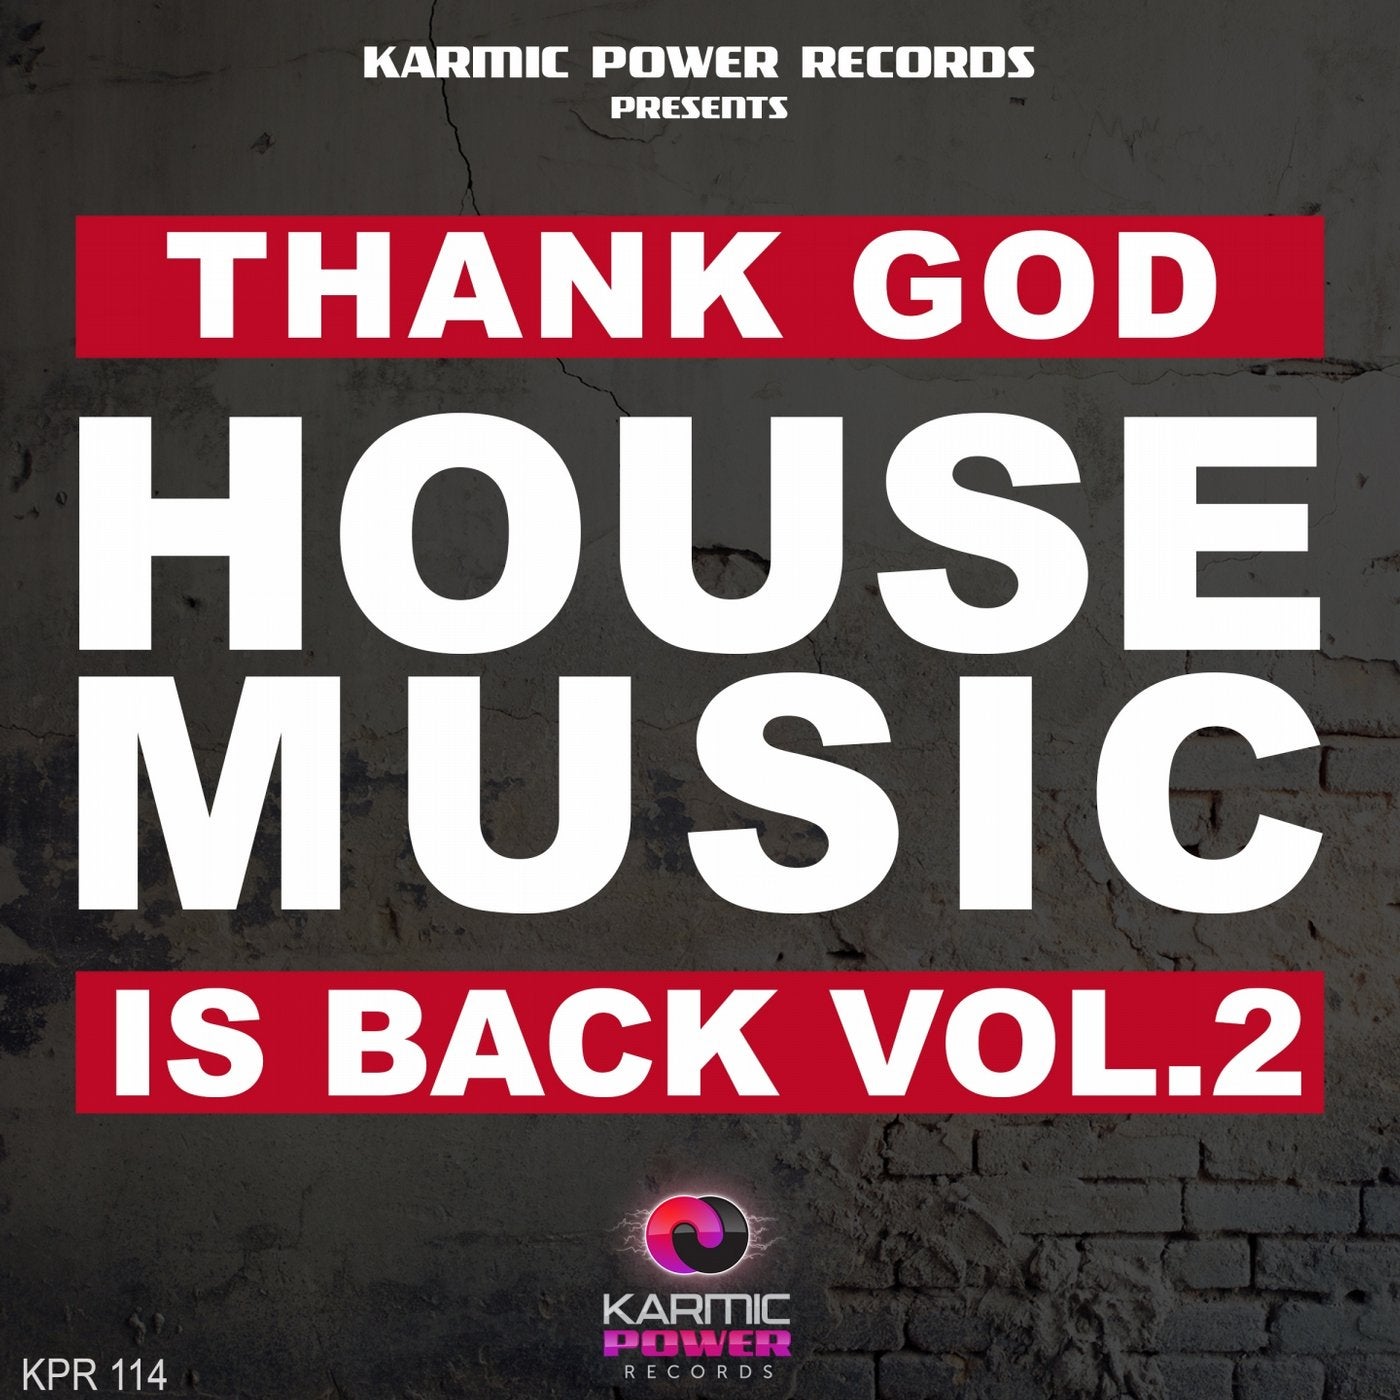 Thank God House Music Is Back, Vol. 2